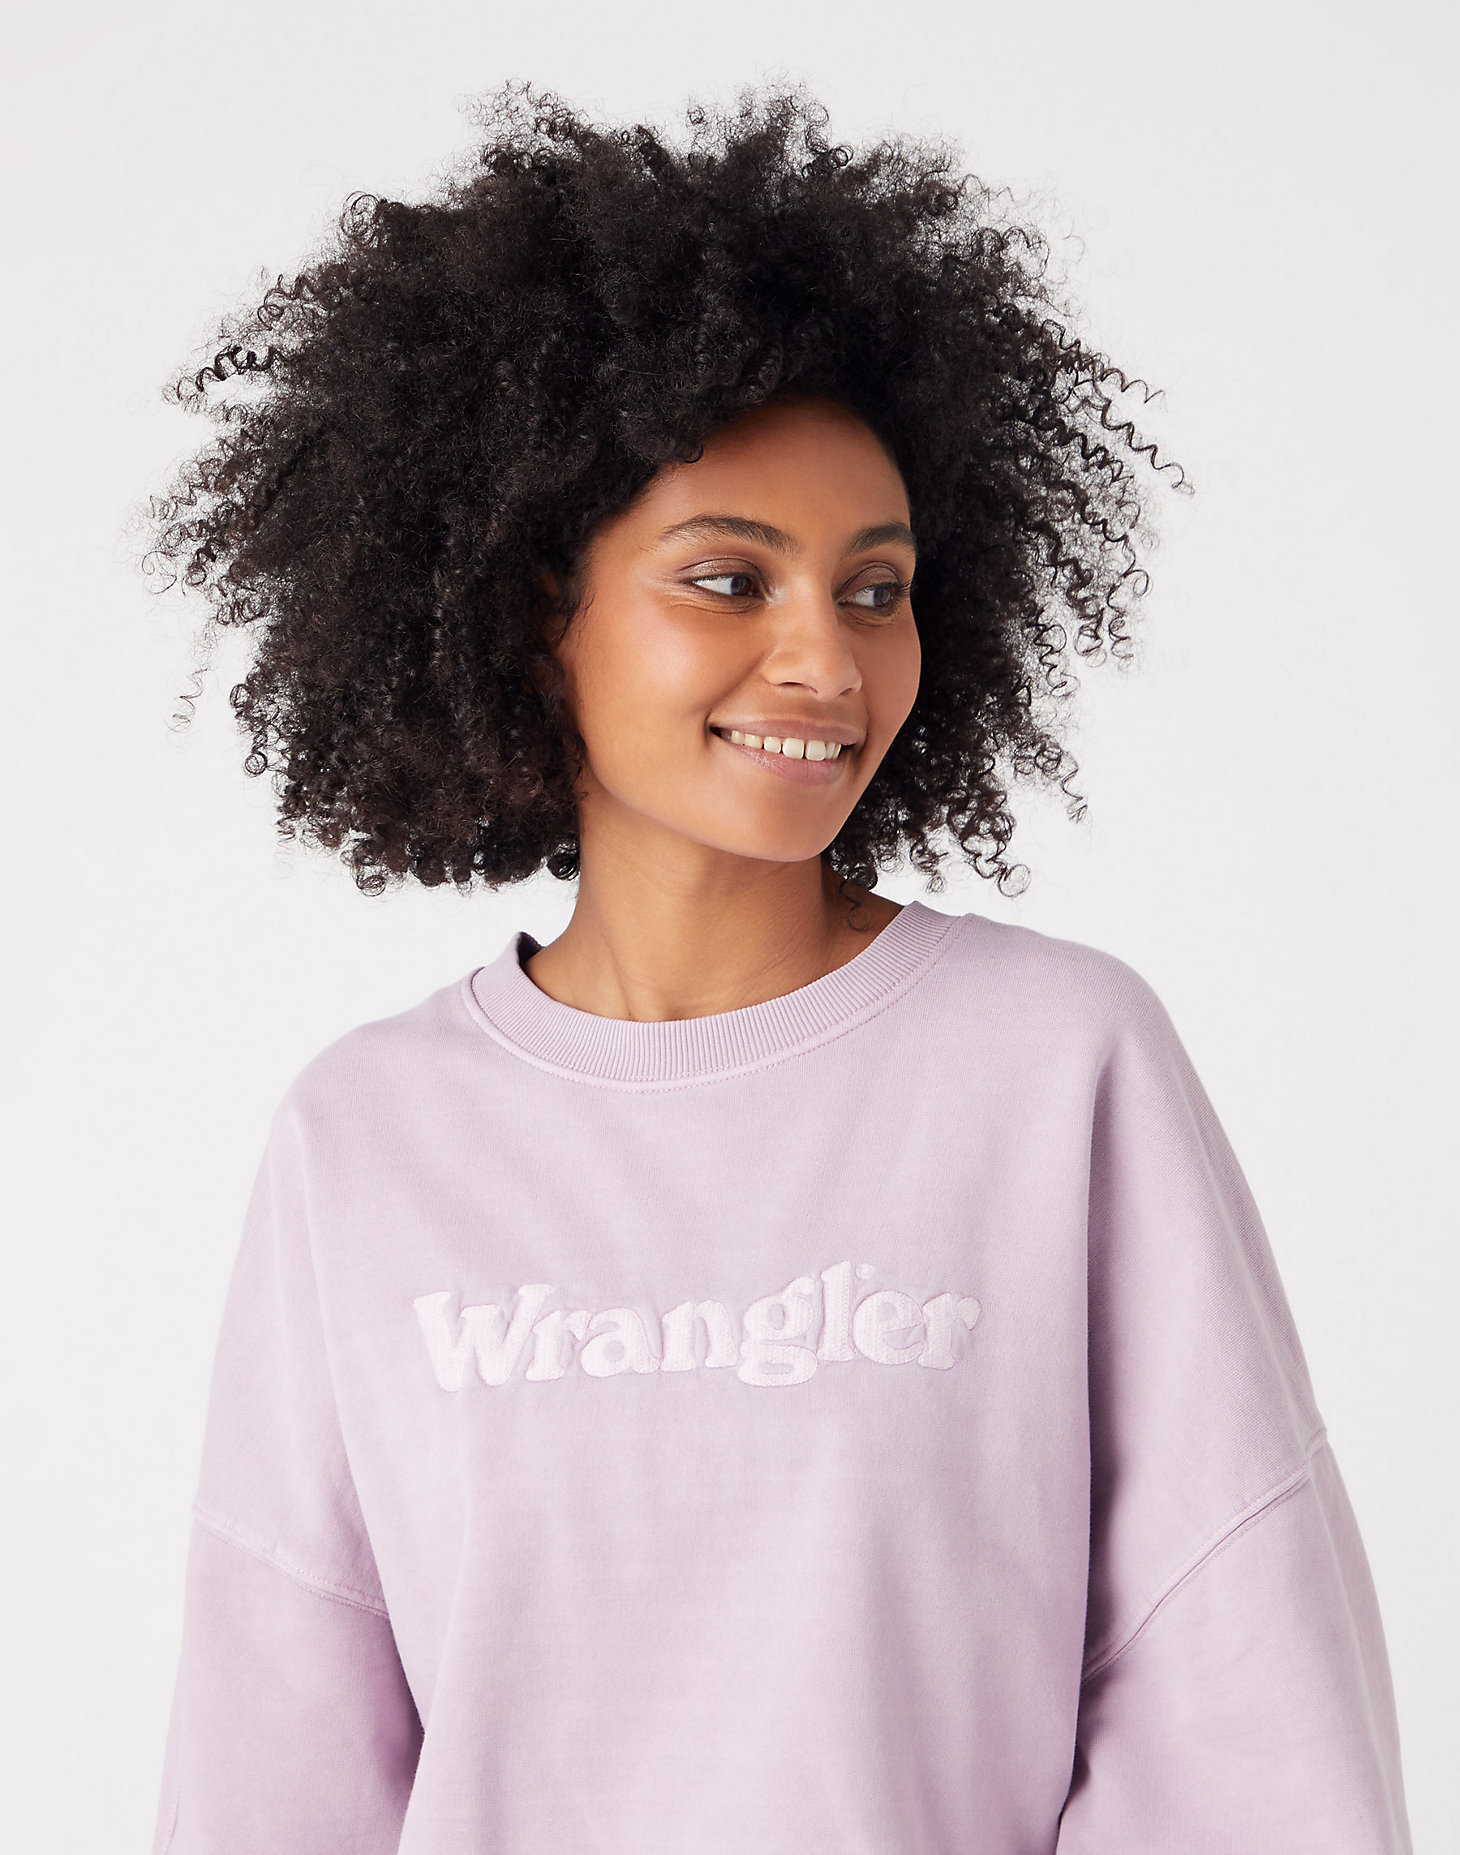 Relaxed Sweatshirt in Natural Violet alternative view 3